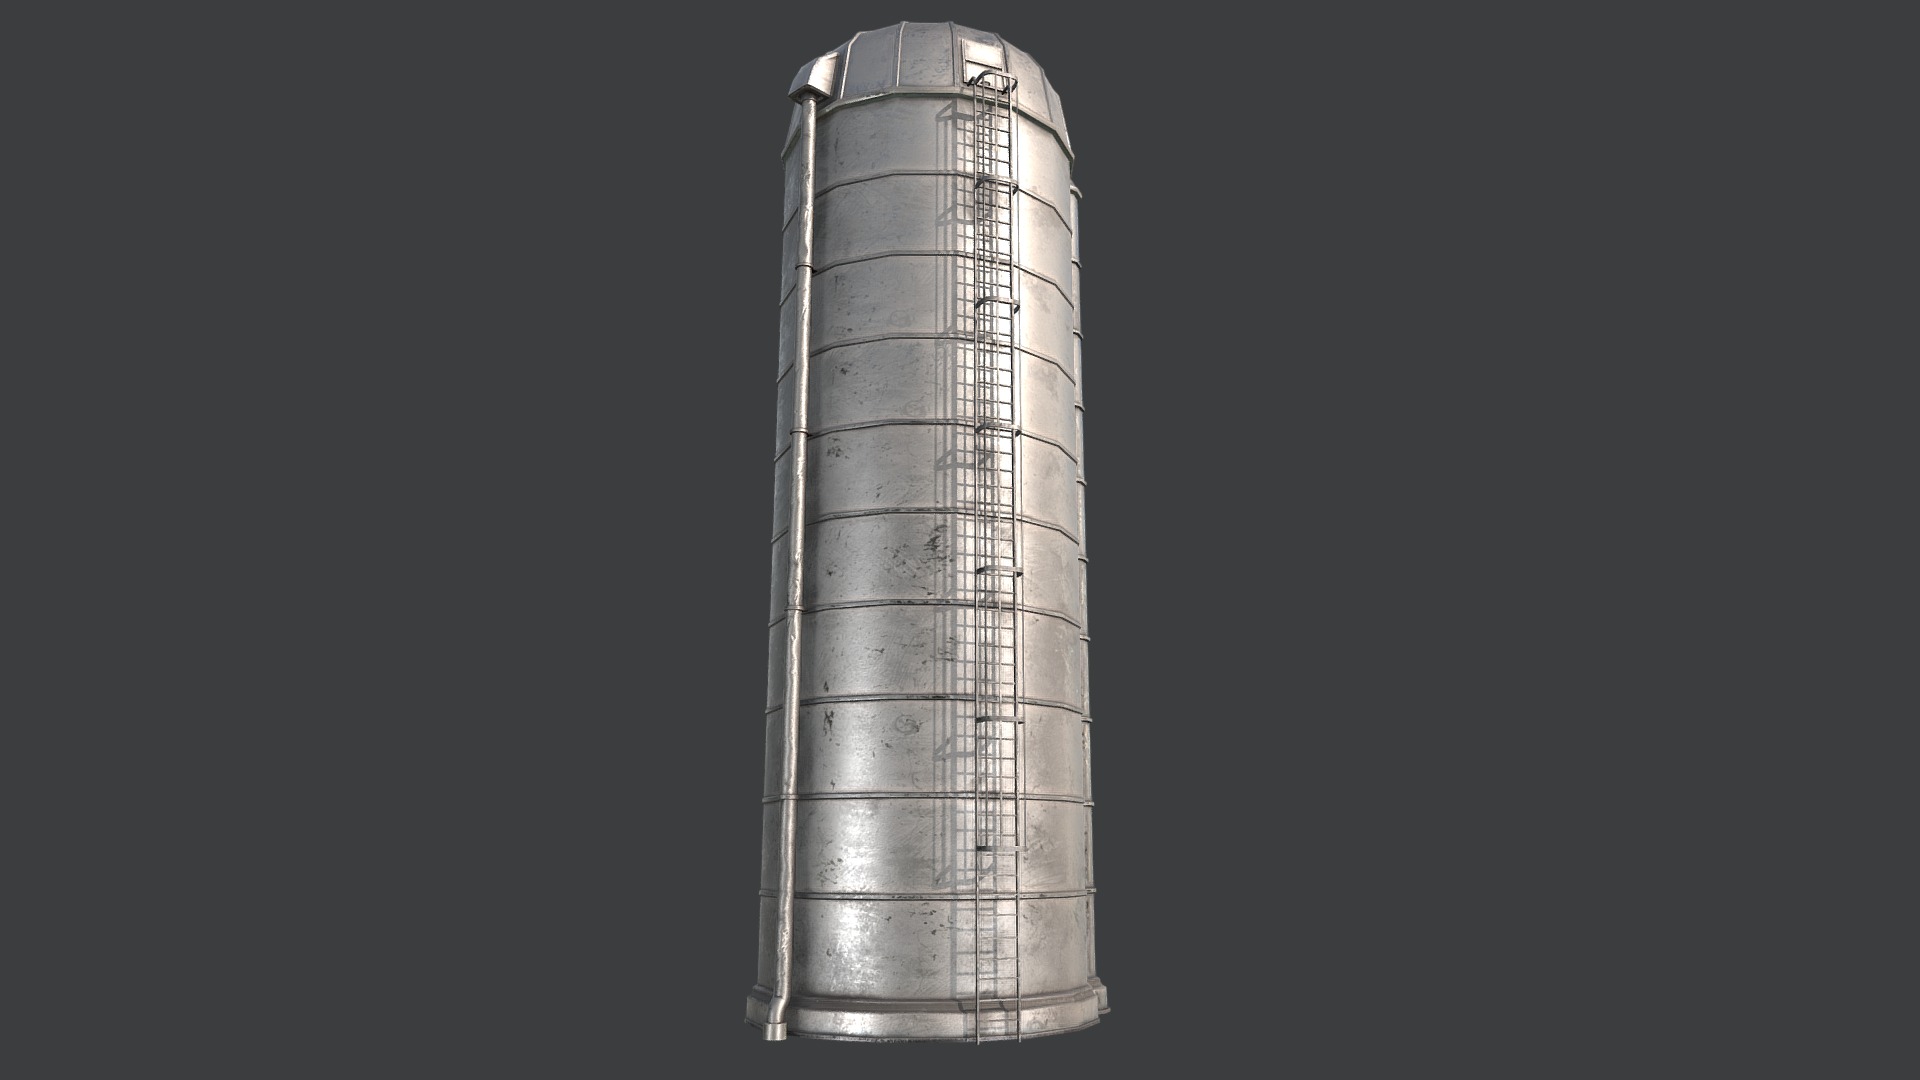 3D model Farm Silo 2 PBR - This is a 3D model of the Farm Silo 2 PBR. The 3D model is about a close-up of a cylindrical object with Turning Torso in the background.